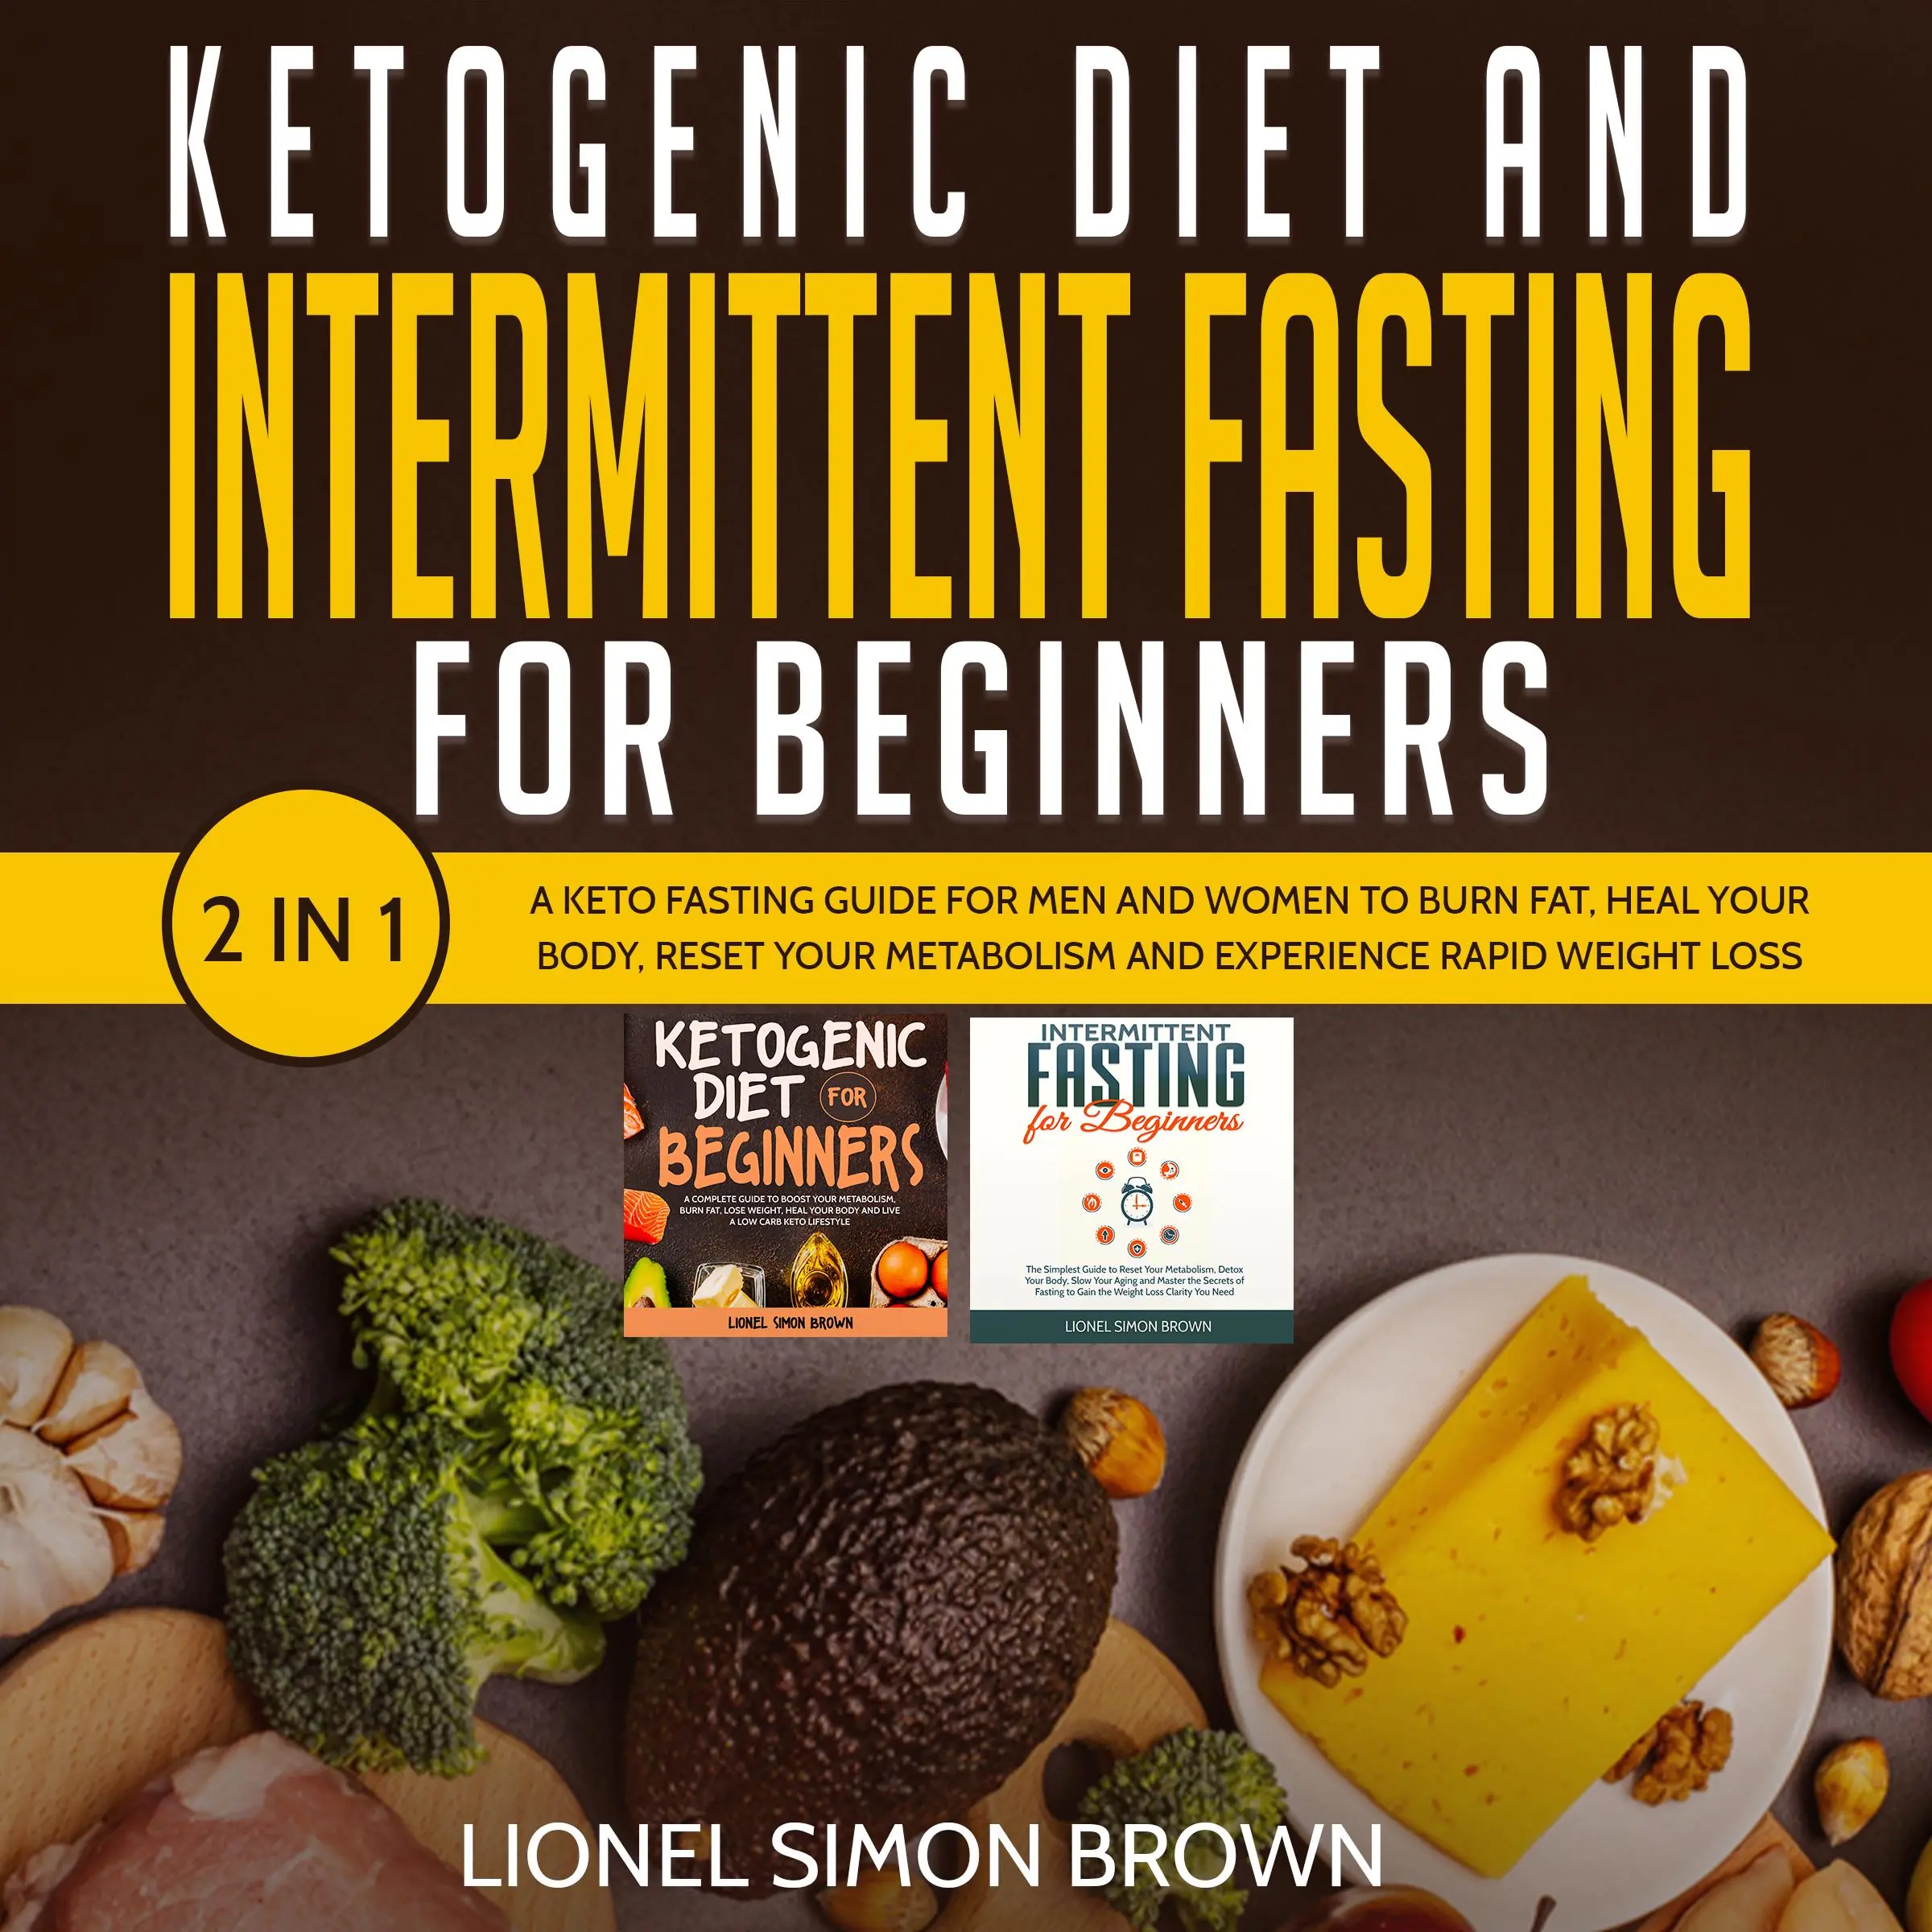 Ketogenic Diet and Intermittent Fasting for Beginners  2 In 1 Audiobook by Lionel Simon Brown